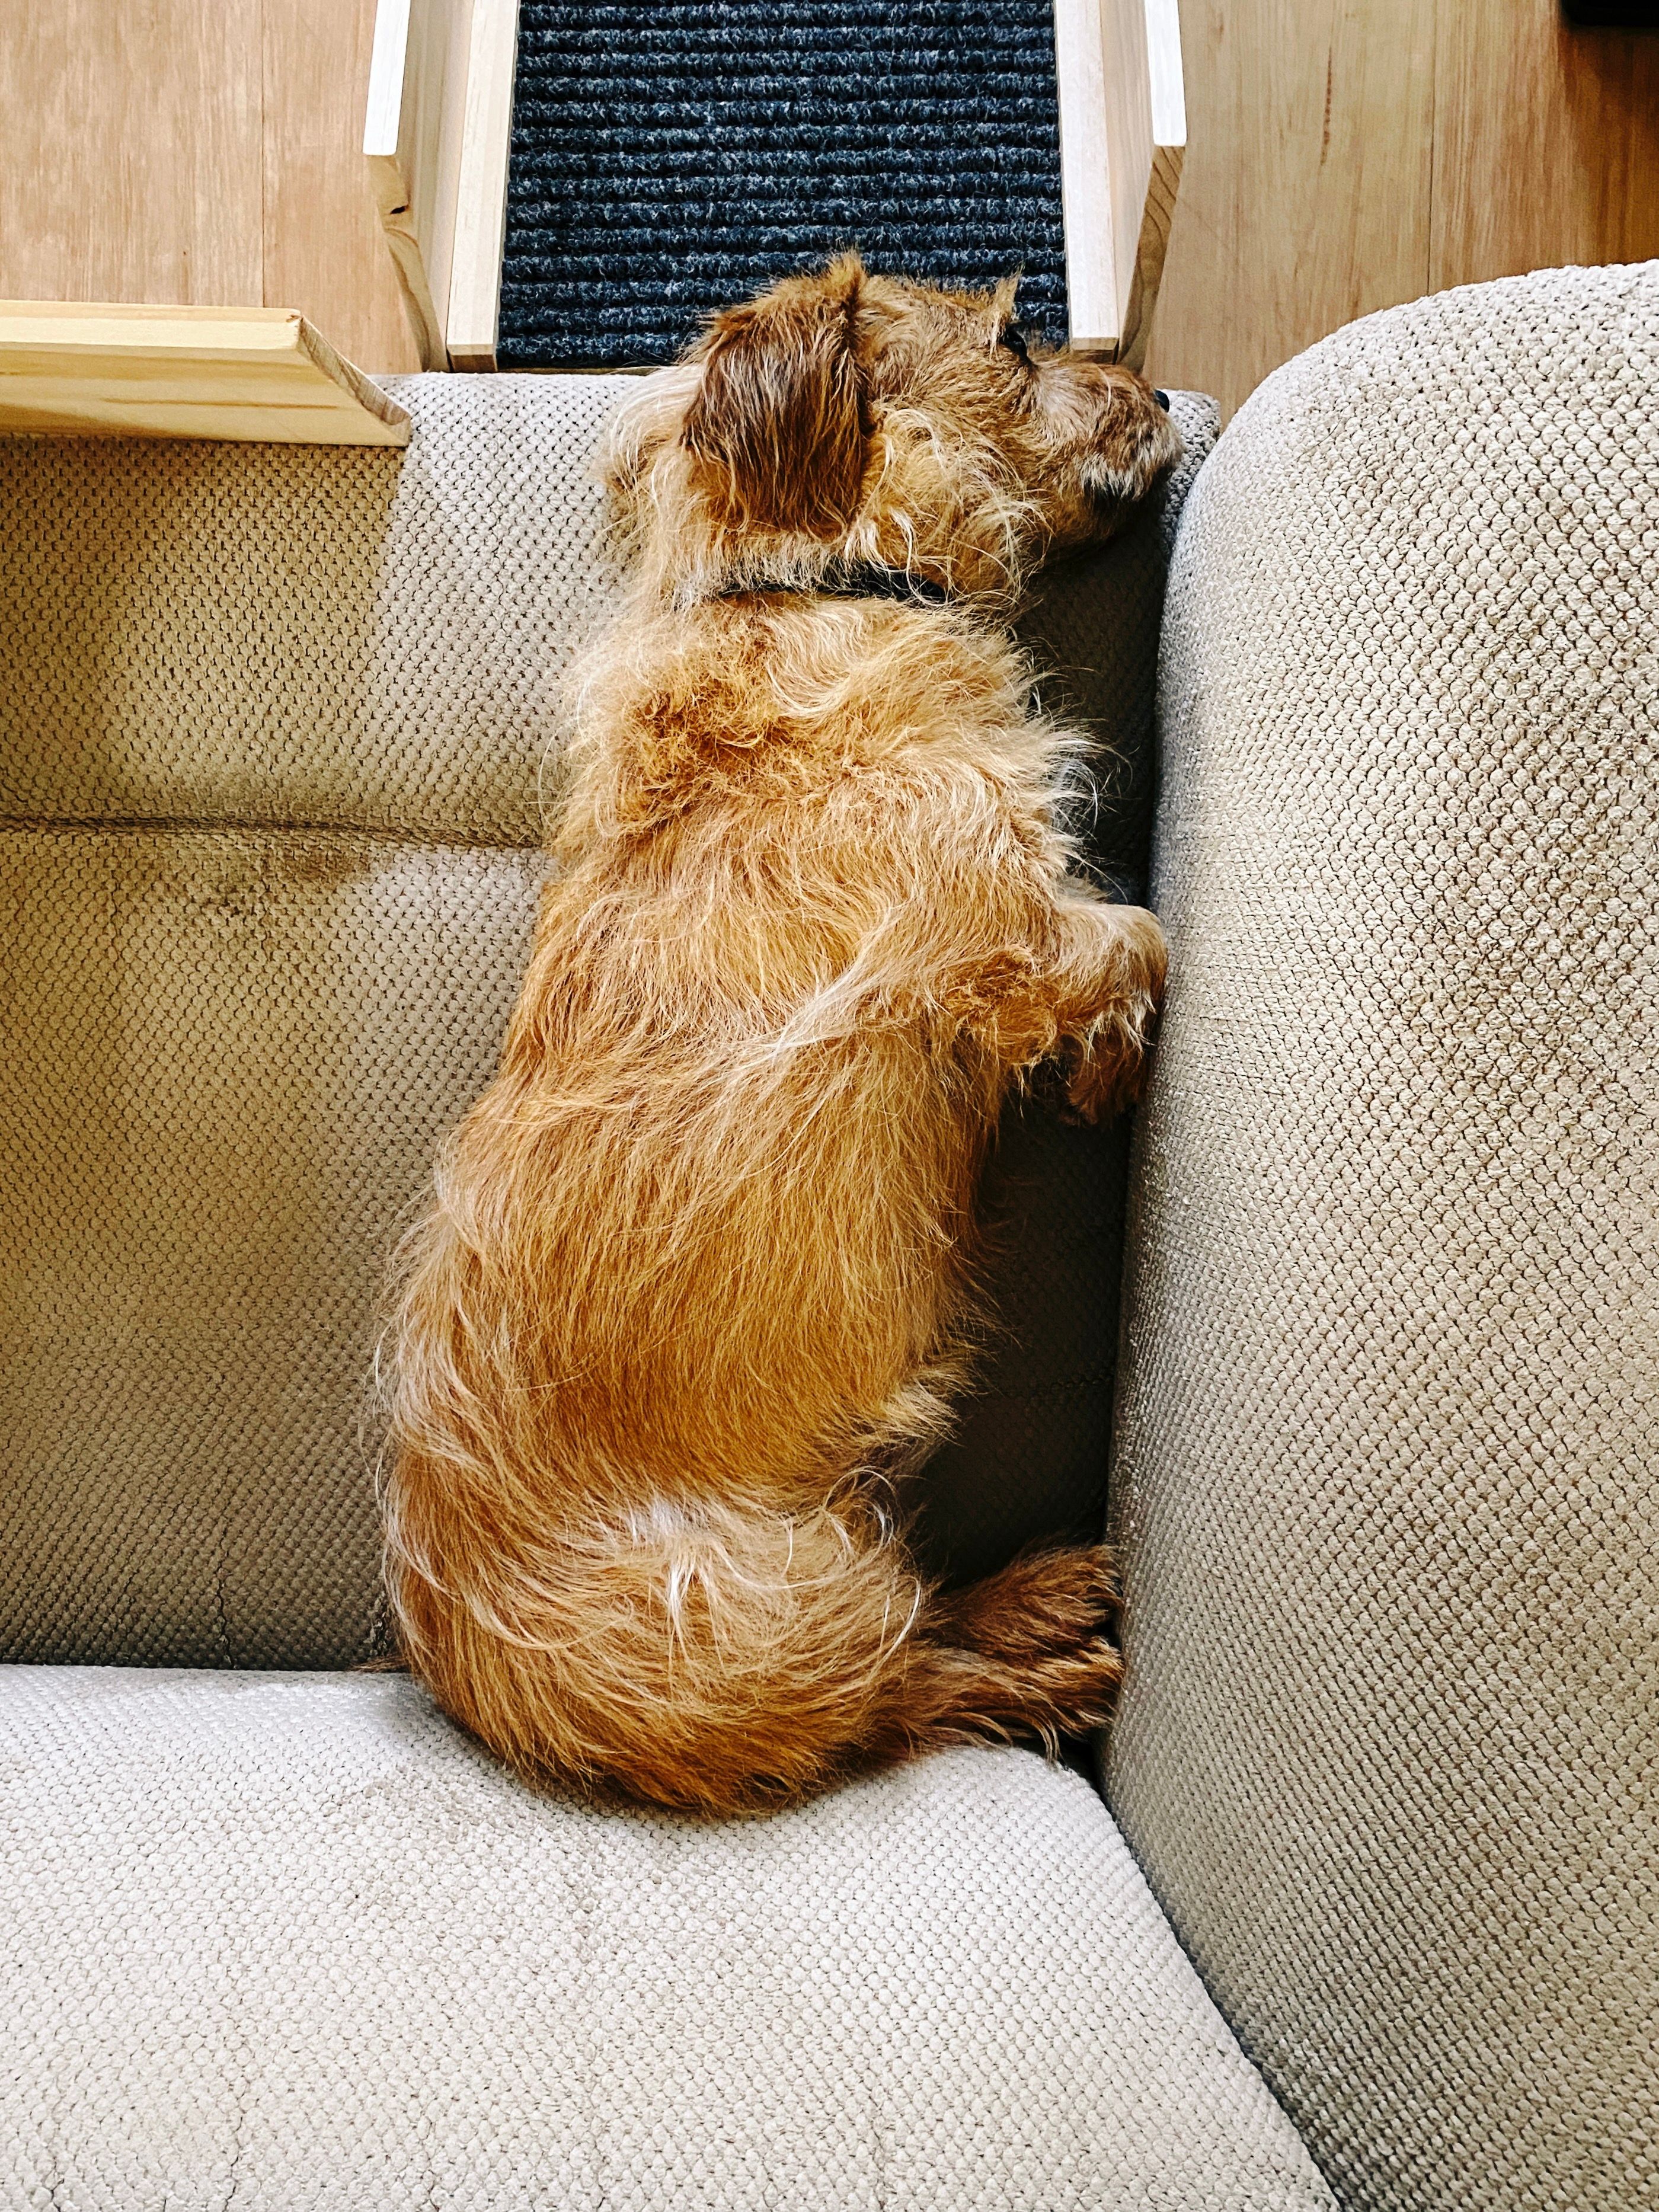 A photo taken from above of a small scruffy blonde dog lying on his side on a lounge seat, as close as possible to the arm of the lounge as possible. His front legs are close enough that they're tucked in, and he looks a lot rounder than he actually us.